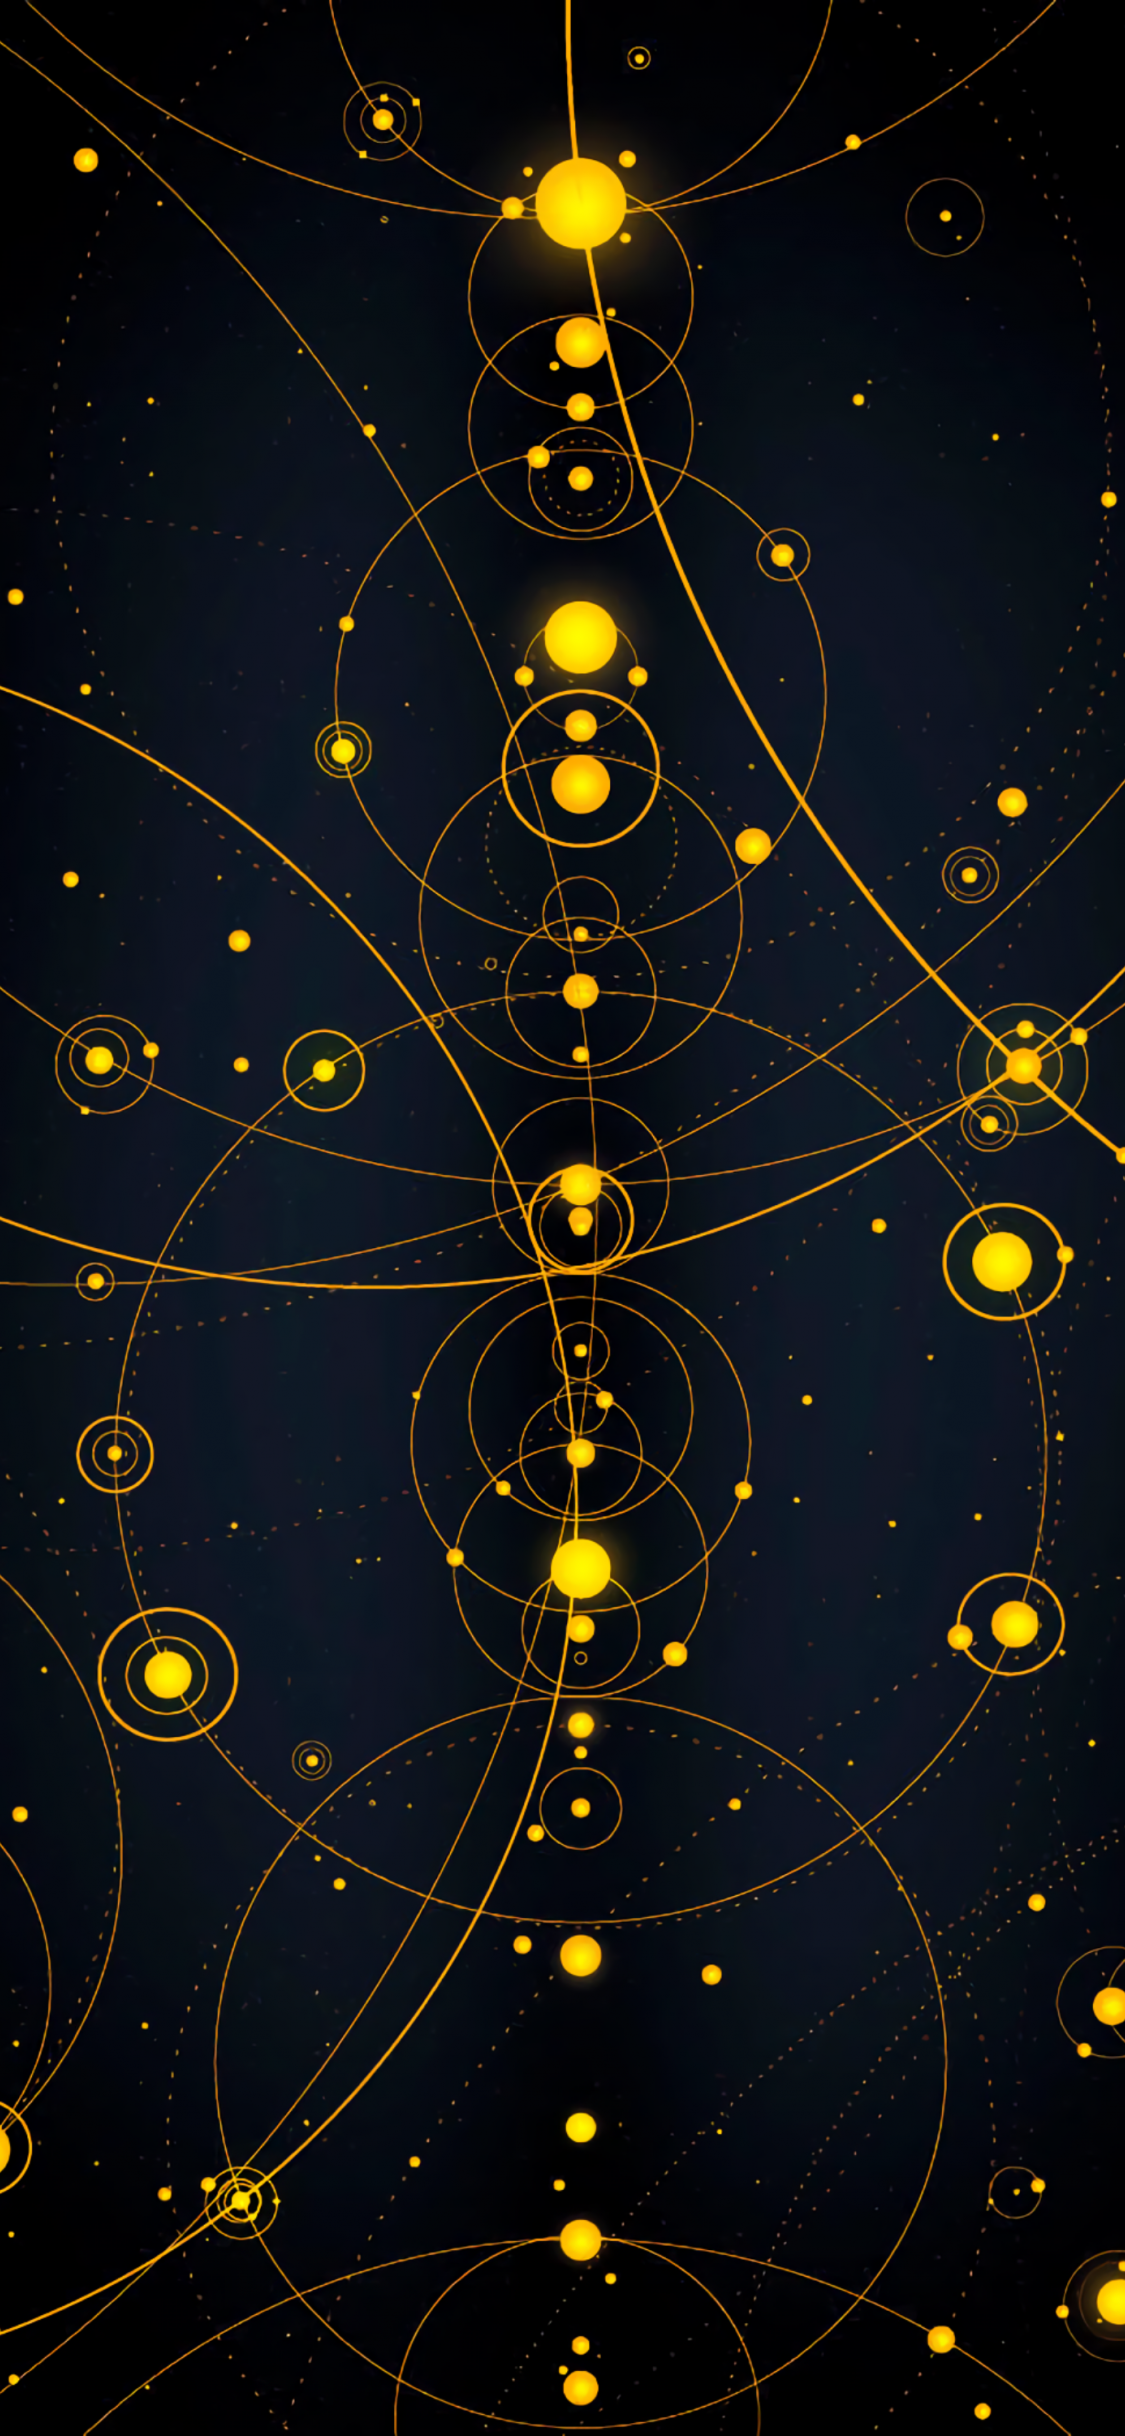 Solar System For iPhone Wallpapers - Wallpaper Cave